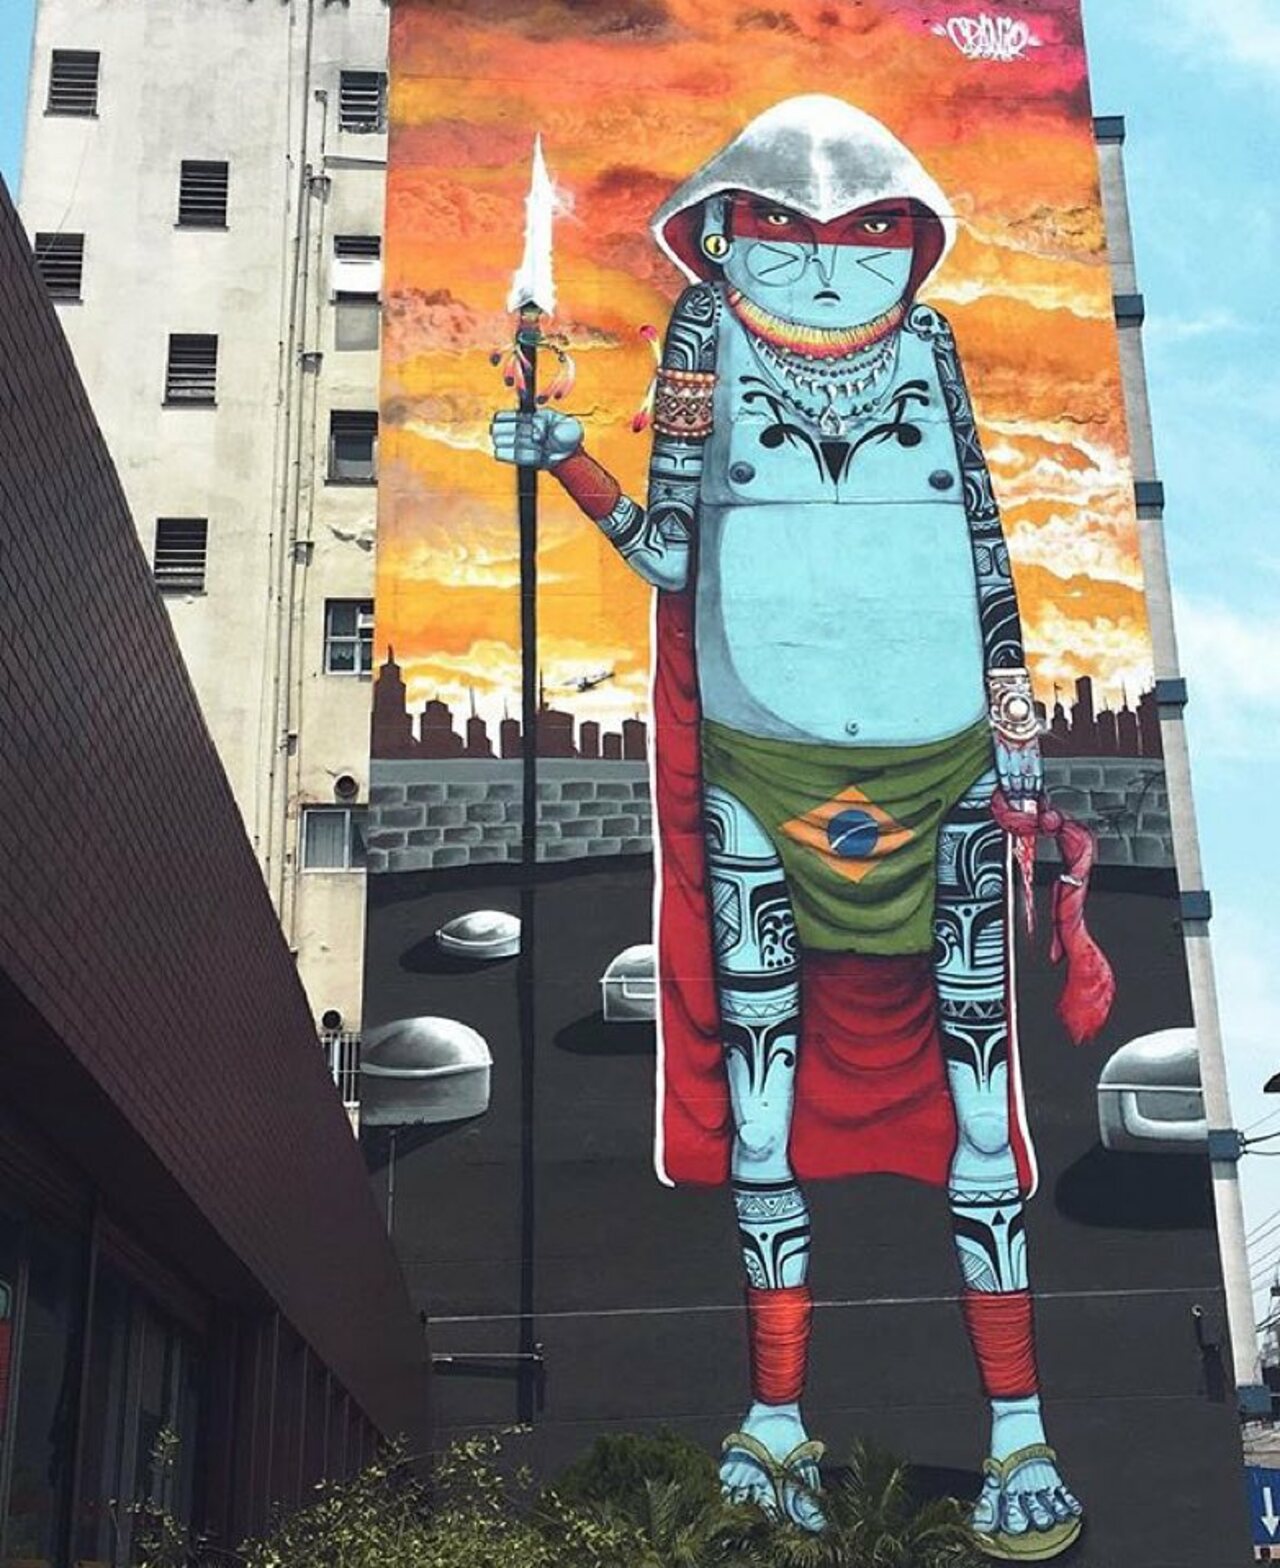 We need to face this Monday with strength like this @cranioartes warrior #streetart #graffiti #publicart #Mondayze https://t.co/sZ3jFWPh1V